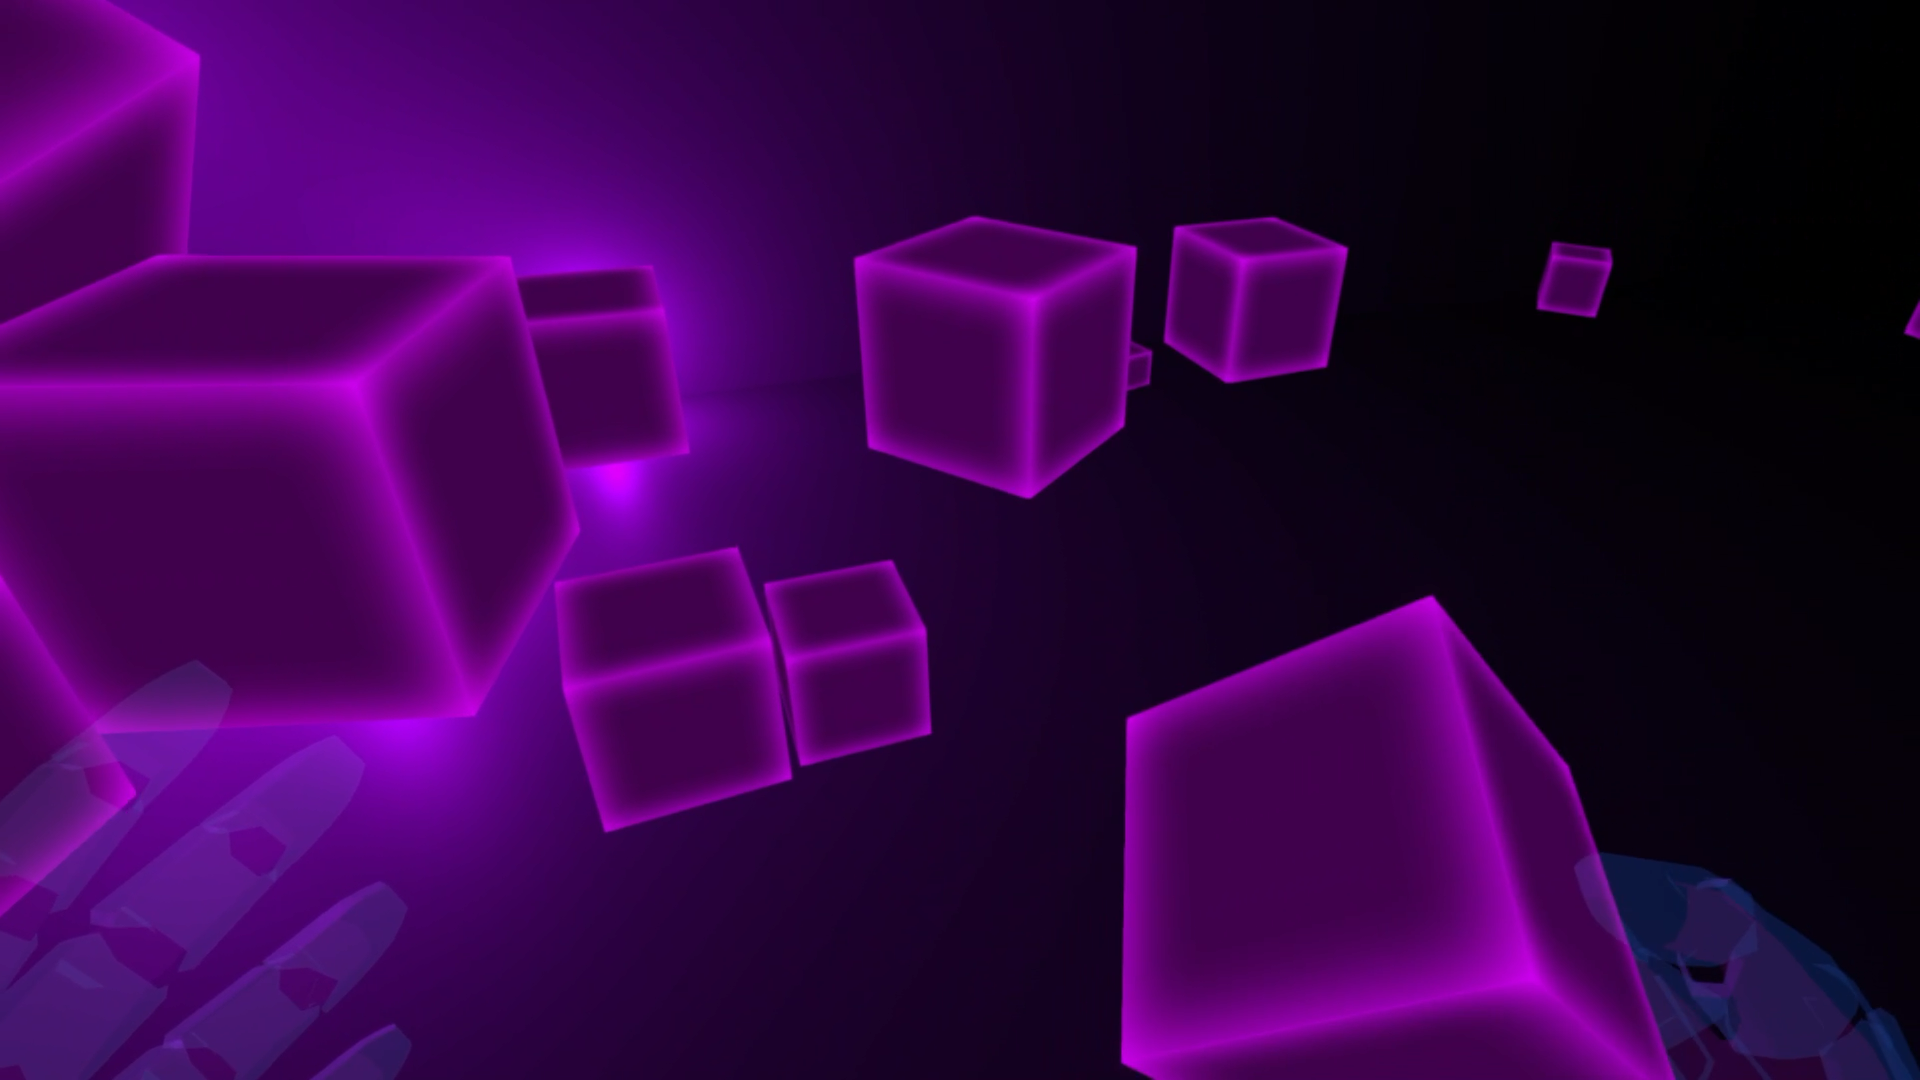 A first-person view of a darkened room filled with glowing purple cubes. We see a pair of transparent virtual hands in front of us, one of which is holding a cube.